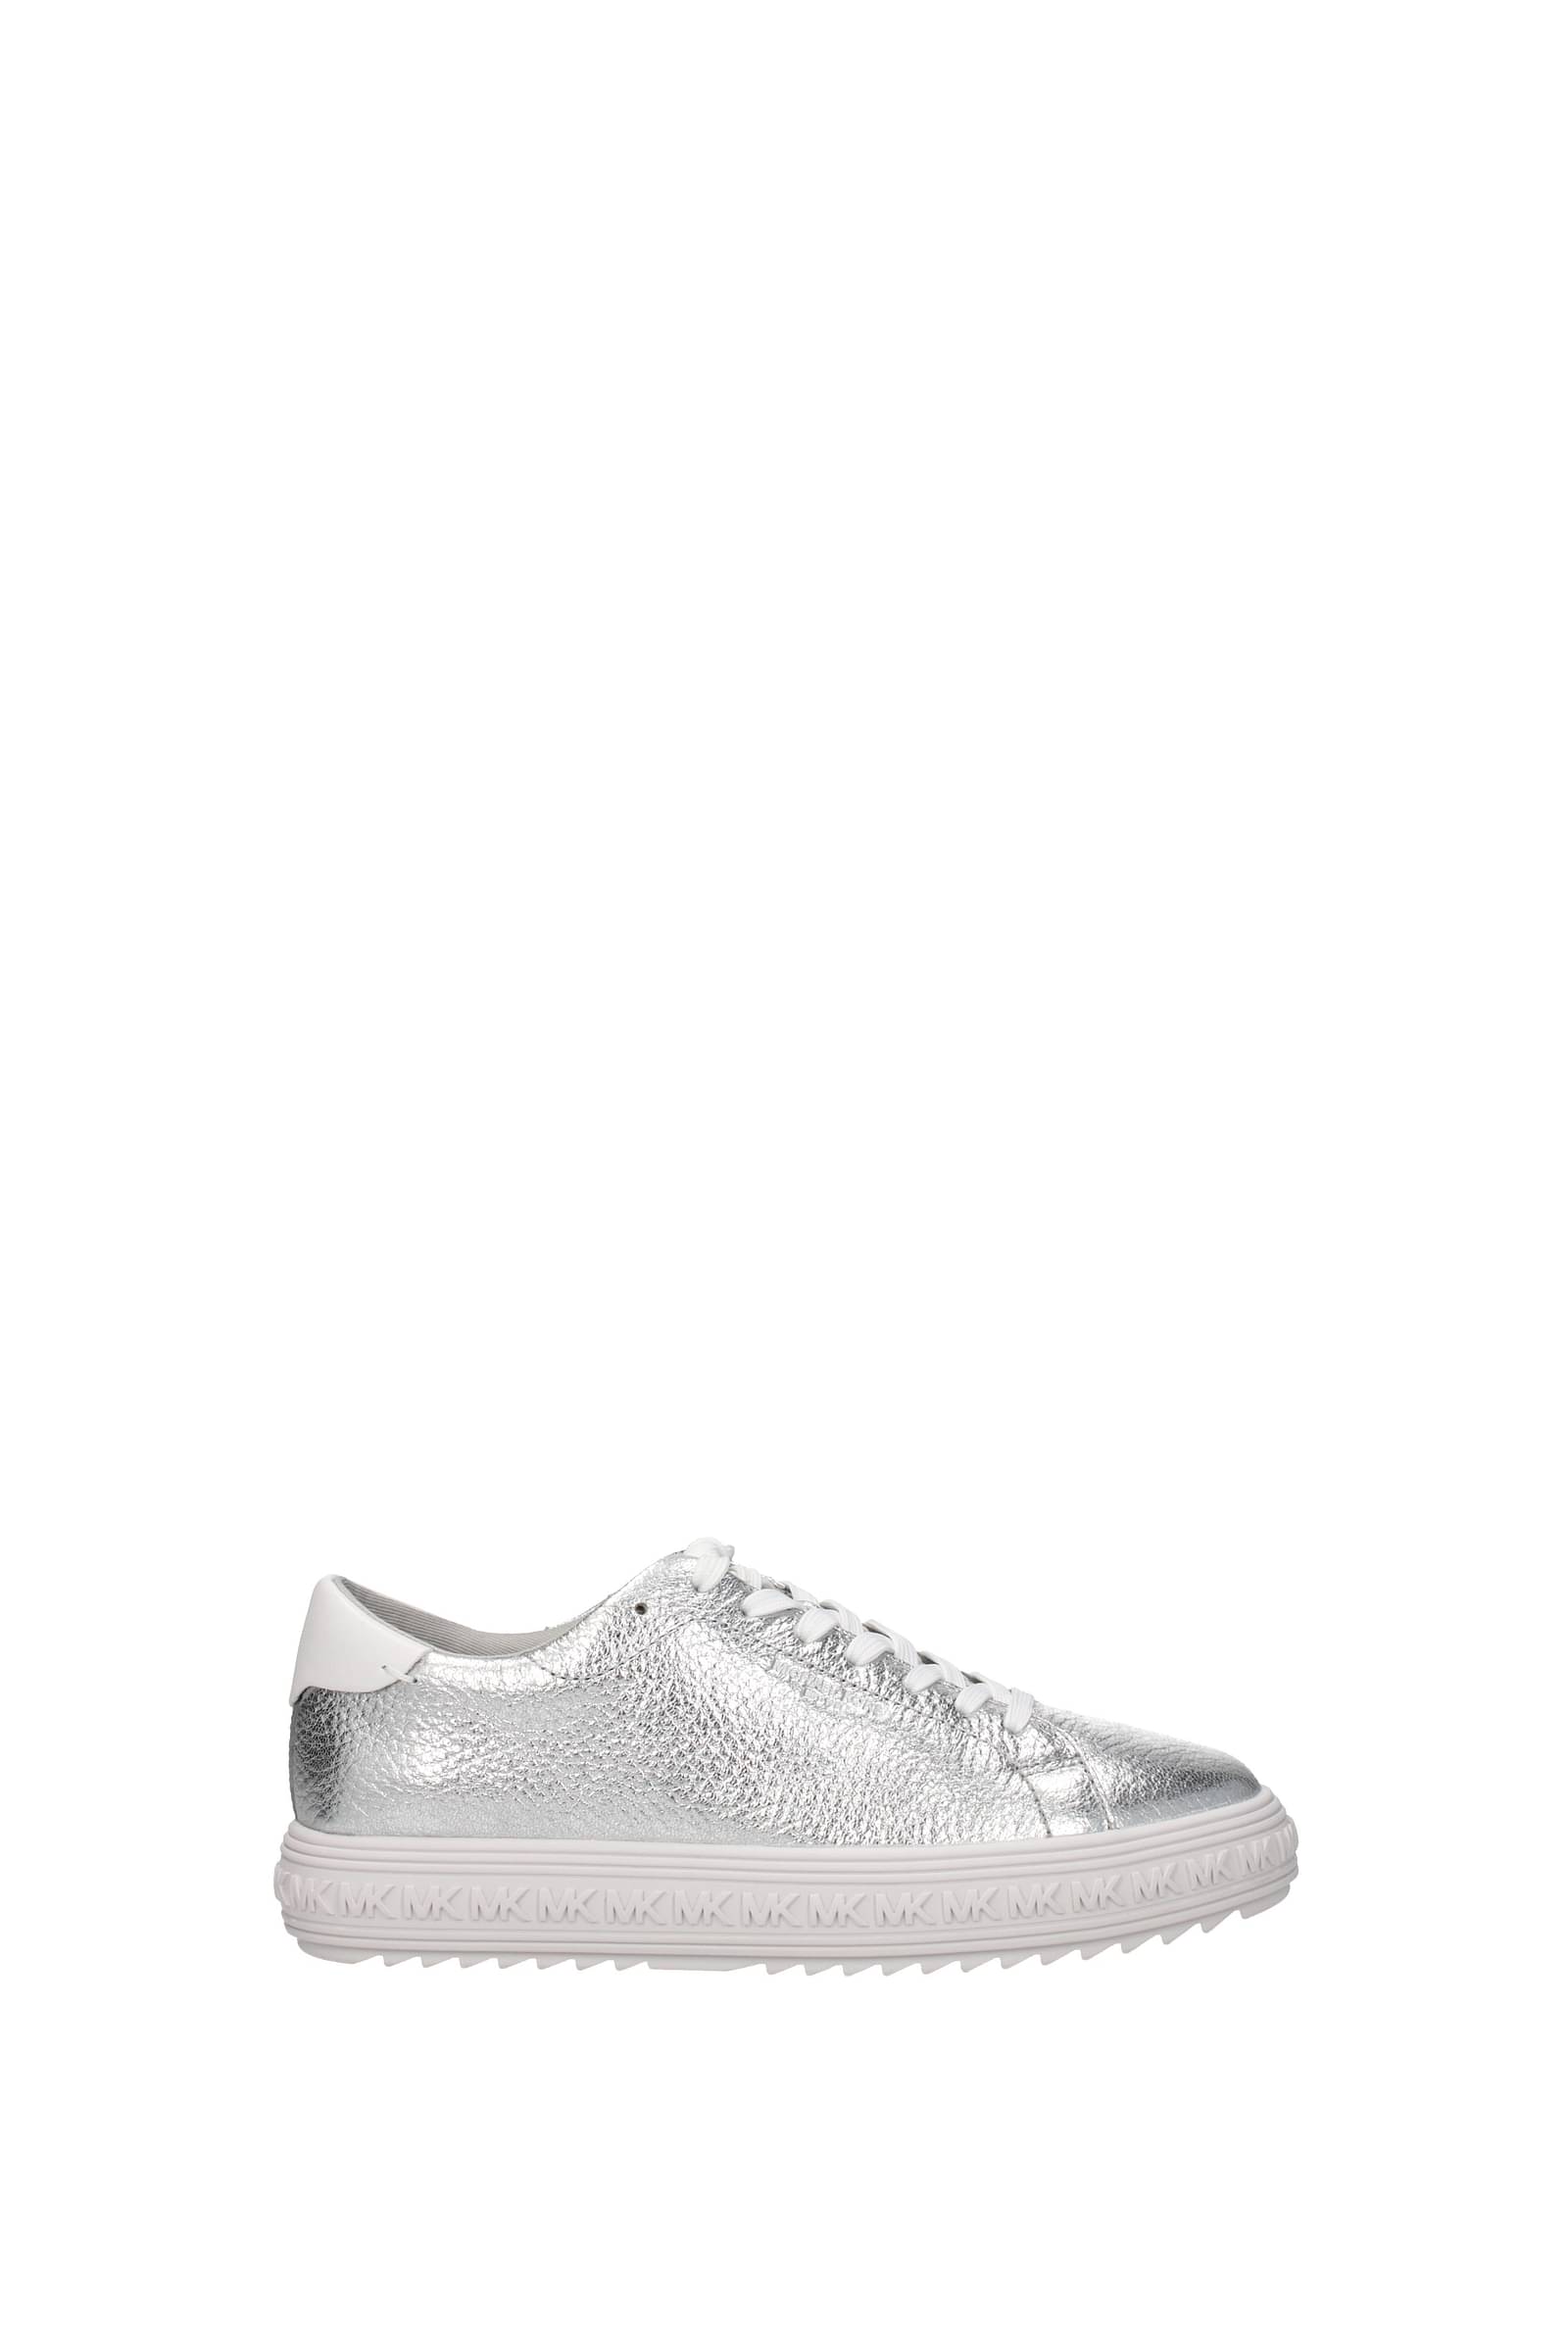 Michael Michael Kors Metallic Silver Ace Lace-up SNEAKERS Size 8 for sale  online | eBay